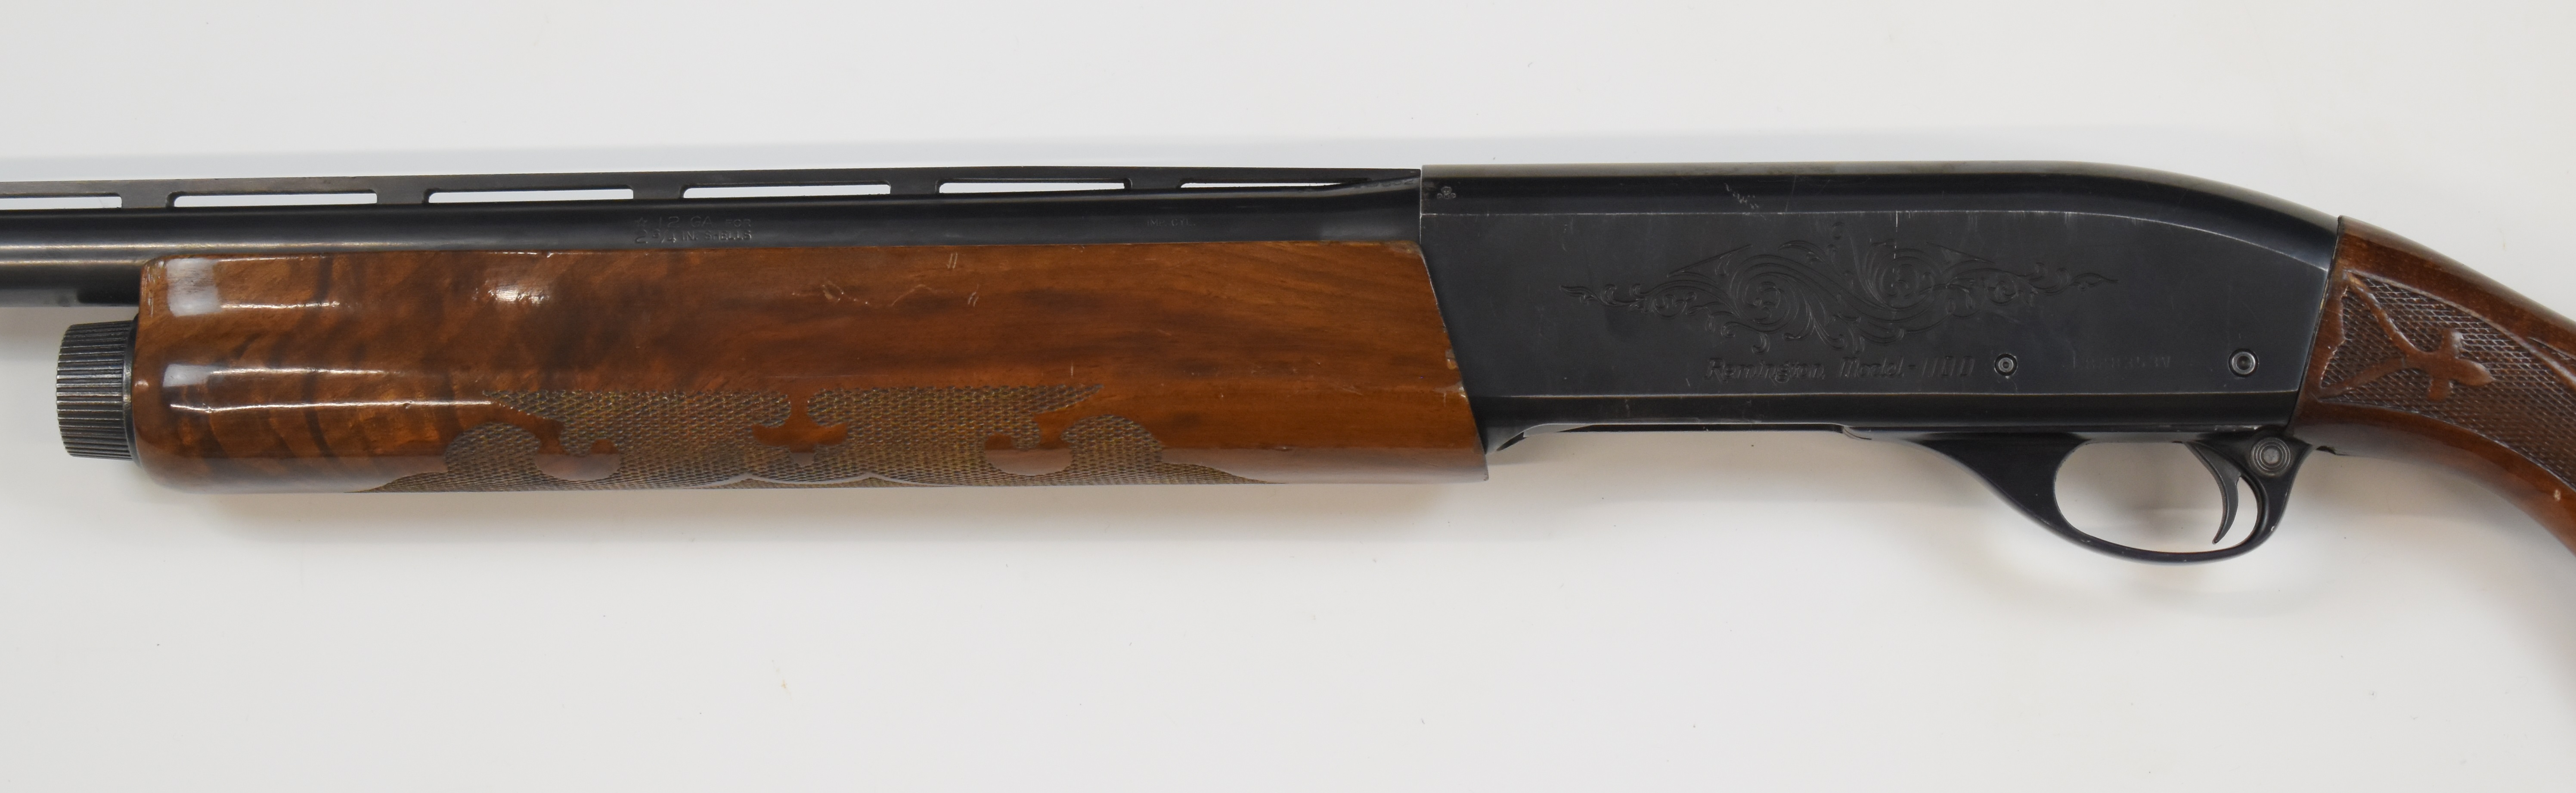 Remington Model 1100 Trap 12 bore 3-shot semi-automatic shotgun with ornately carved and chequered - Image 9 of 11